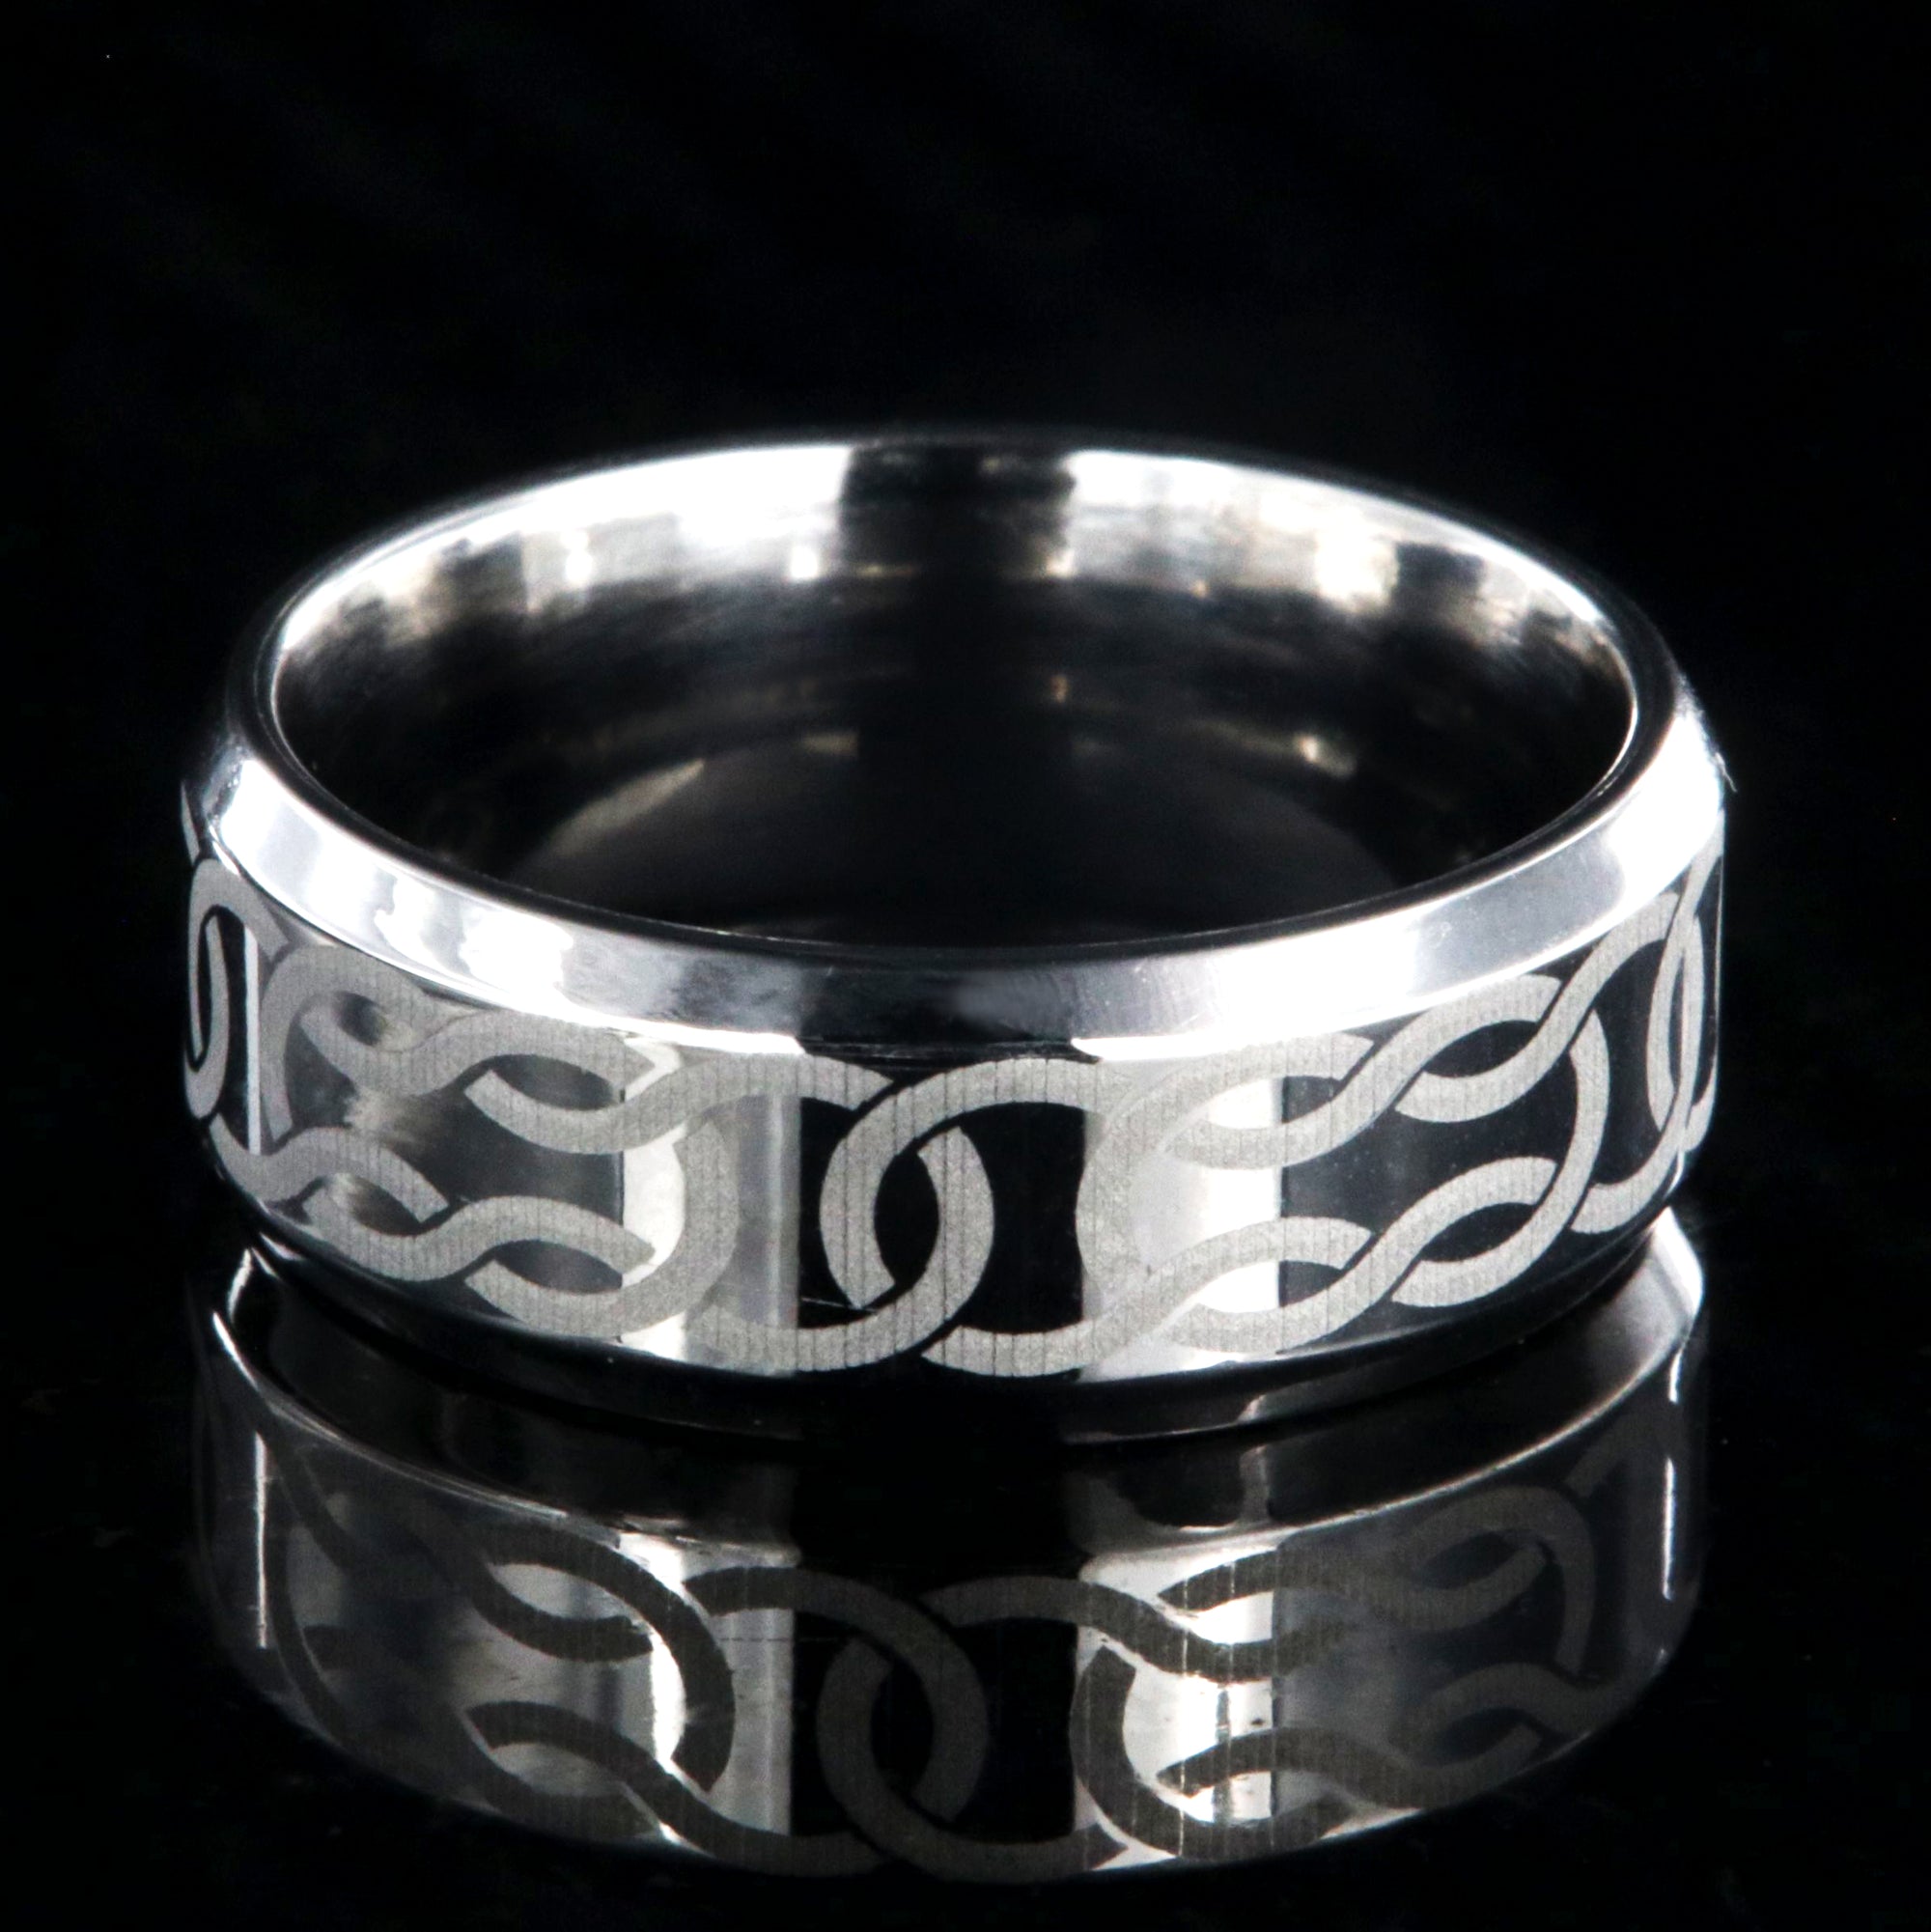 8mm wide cobalt ring with Celtic knot and beveled edges